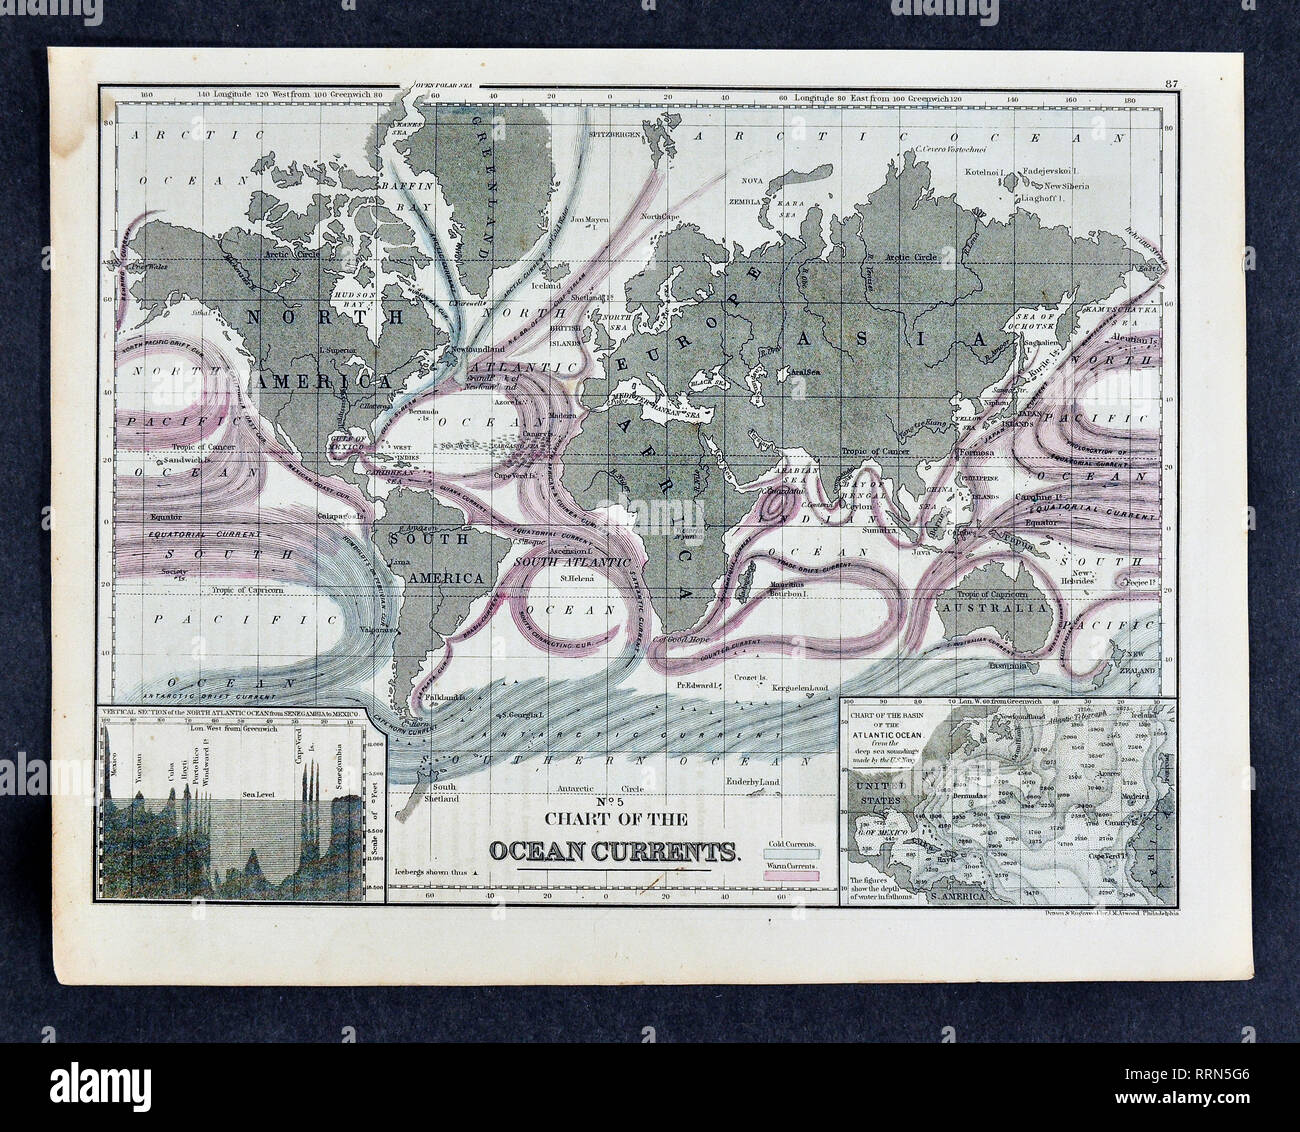 1868 Mitchell Physical World Map showing Ocean Currents Stock Photo